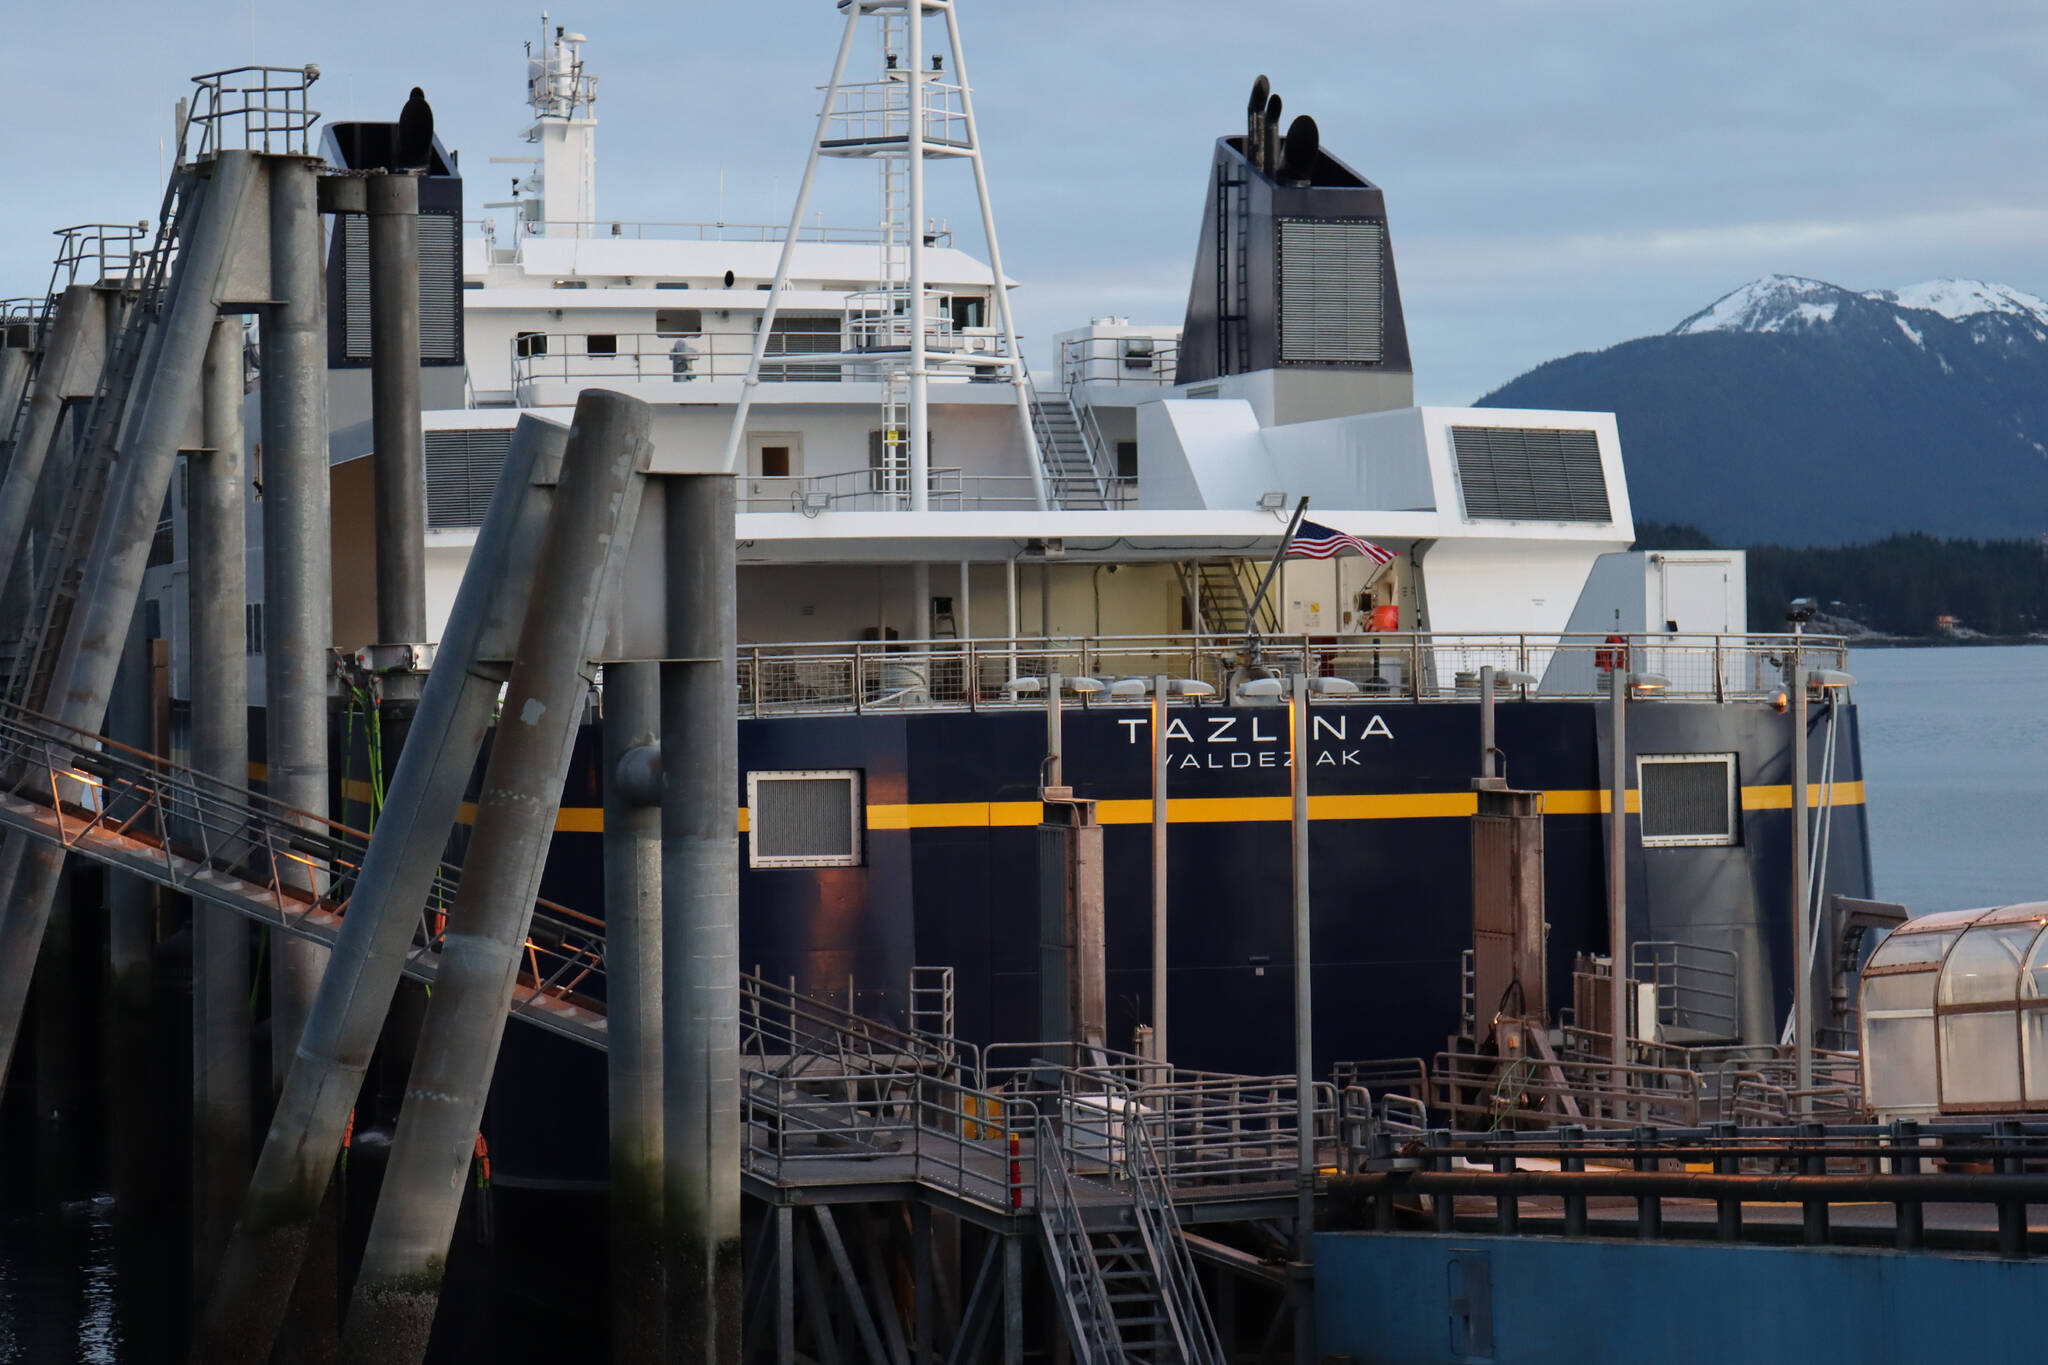 The MV Tazlina is docked at the Auke Bay ferry terminal in this Nov. 15, 2021, photo. The Alaska Marine Highway System ferry is expected to provide service from early January through February, according to the Alaska Department of Public Transportation and Public Facilities. Updates on some aspects of winter operations from October until next April were provided by top ferry and state transportation officials during an Alaska Marine Highway Operations Board meeting Friday.  (Ben Hohenstatt / Juneau Empire File)